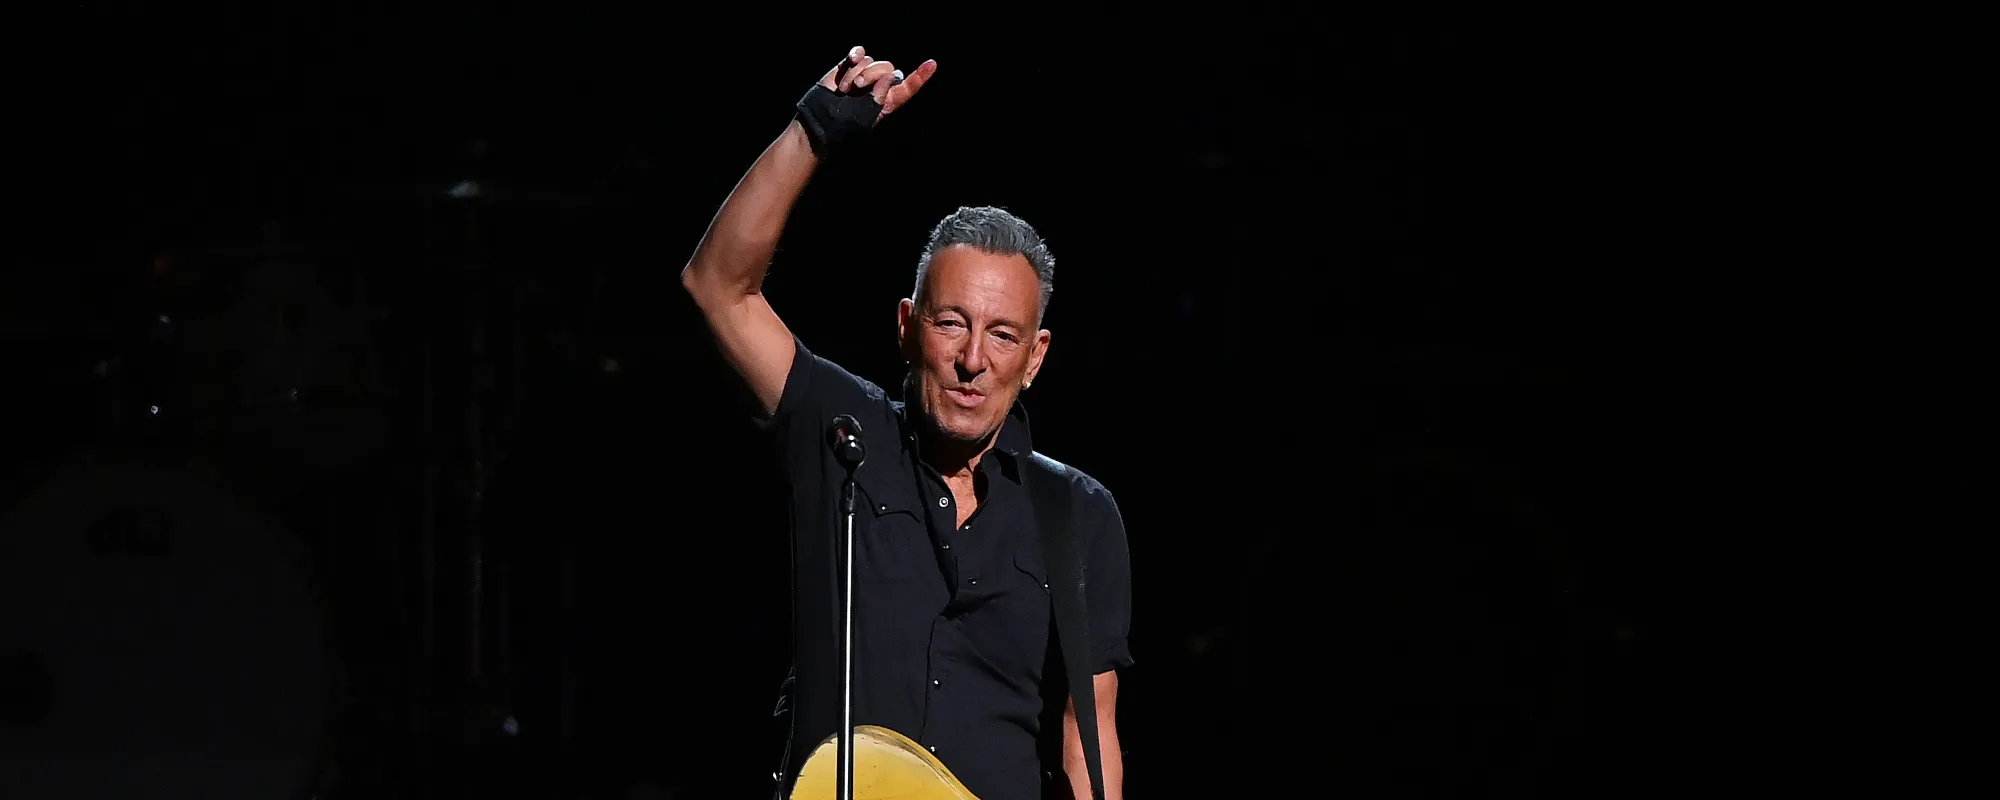 Bruce Springsteen and the E Street Band Postpone Number of Tour Dates Due to Illness